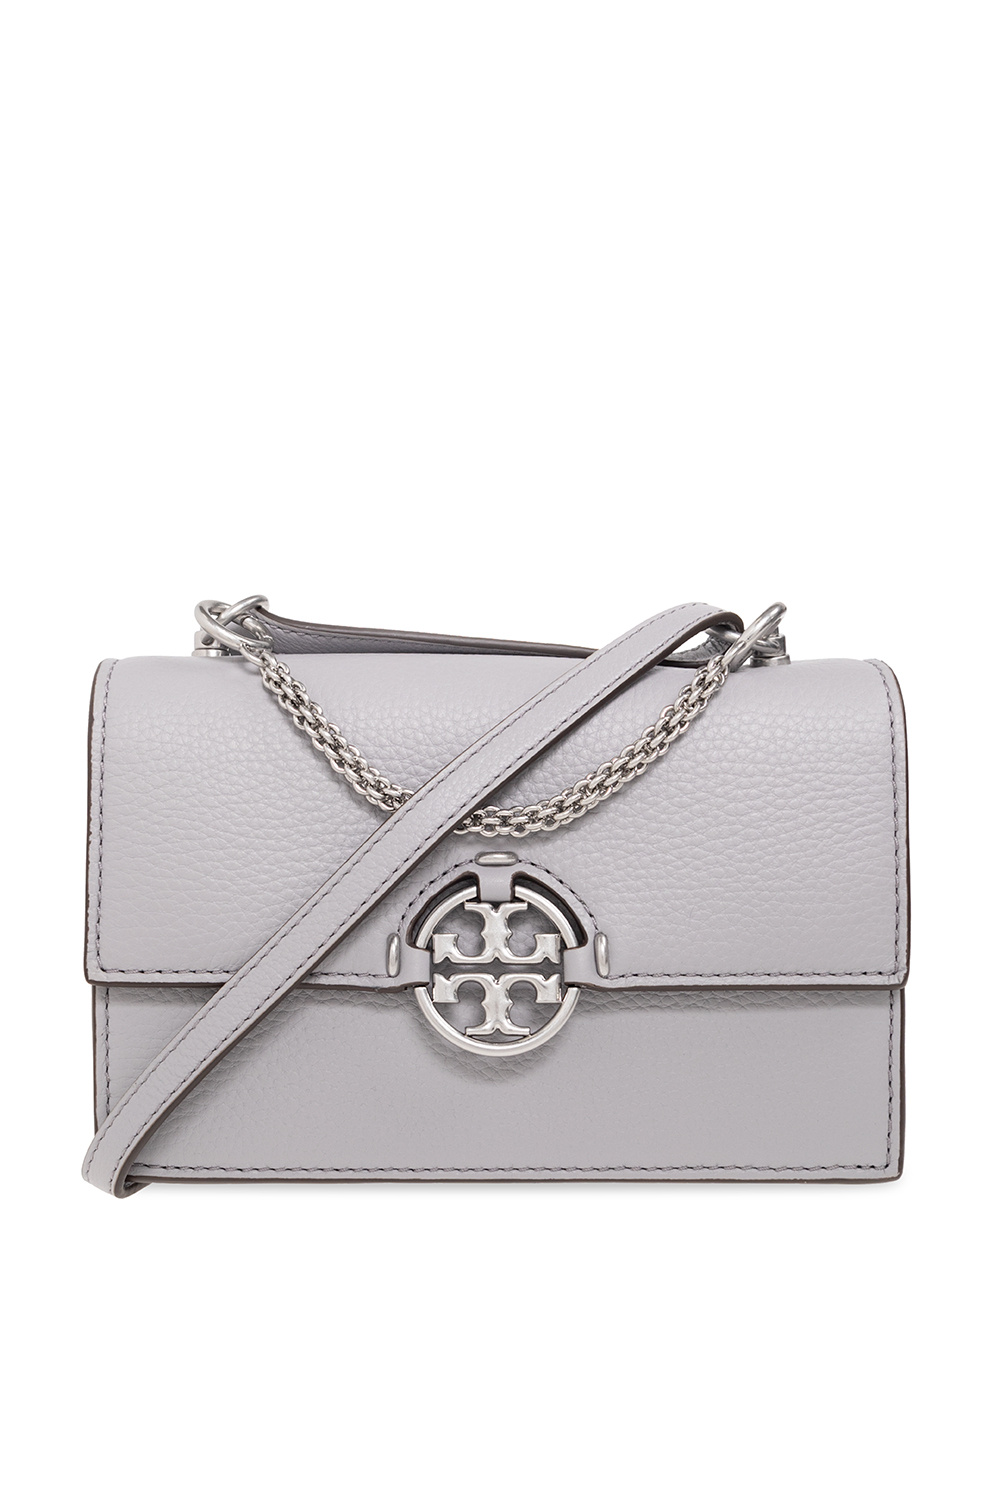 Tory Burch Miller Mini Bag / Leather/ Color Bay Gray $398